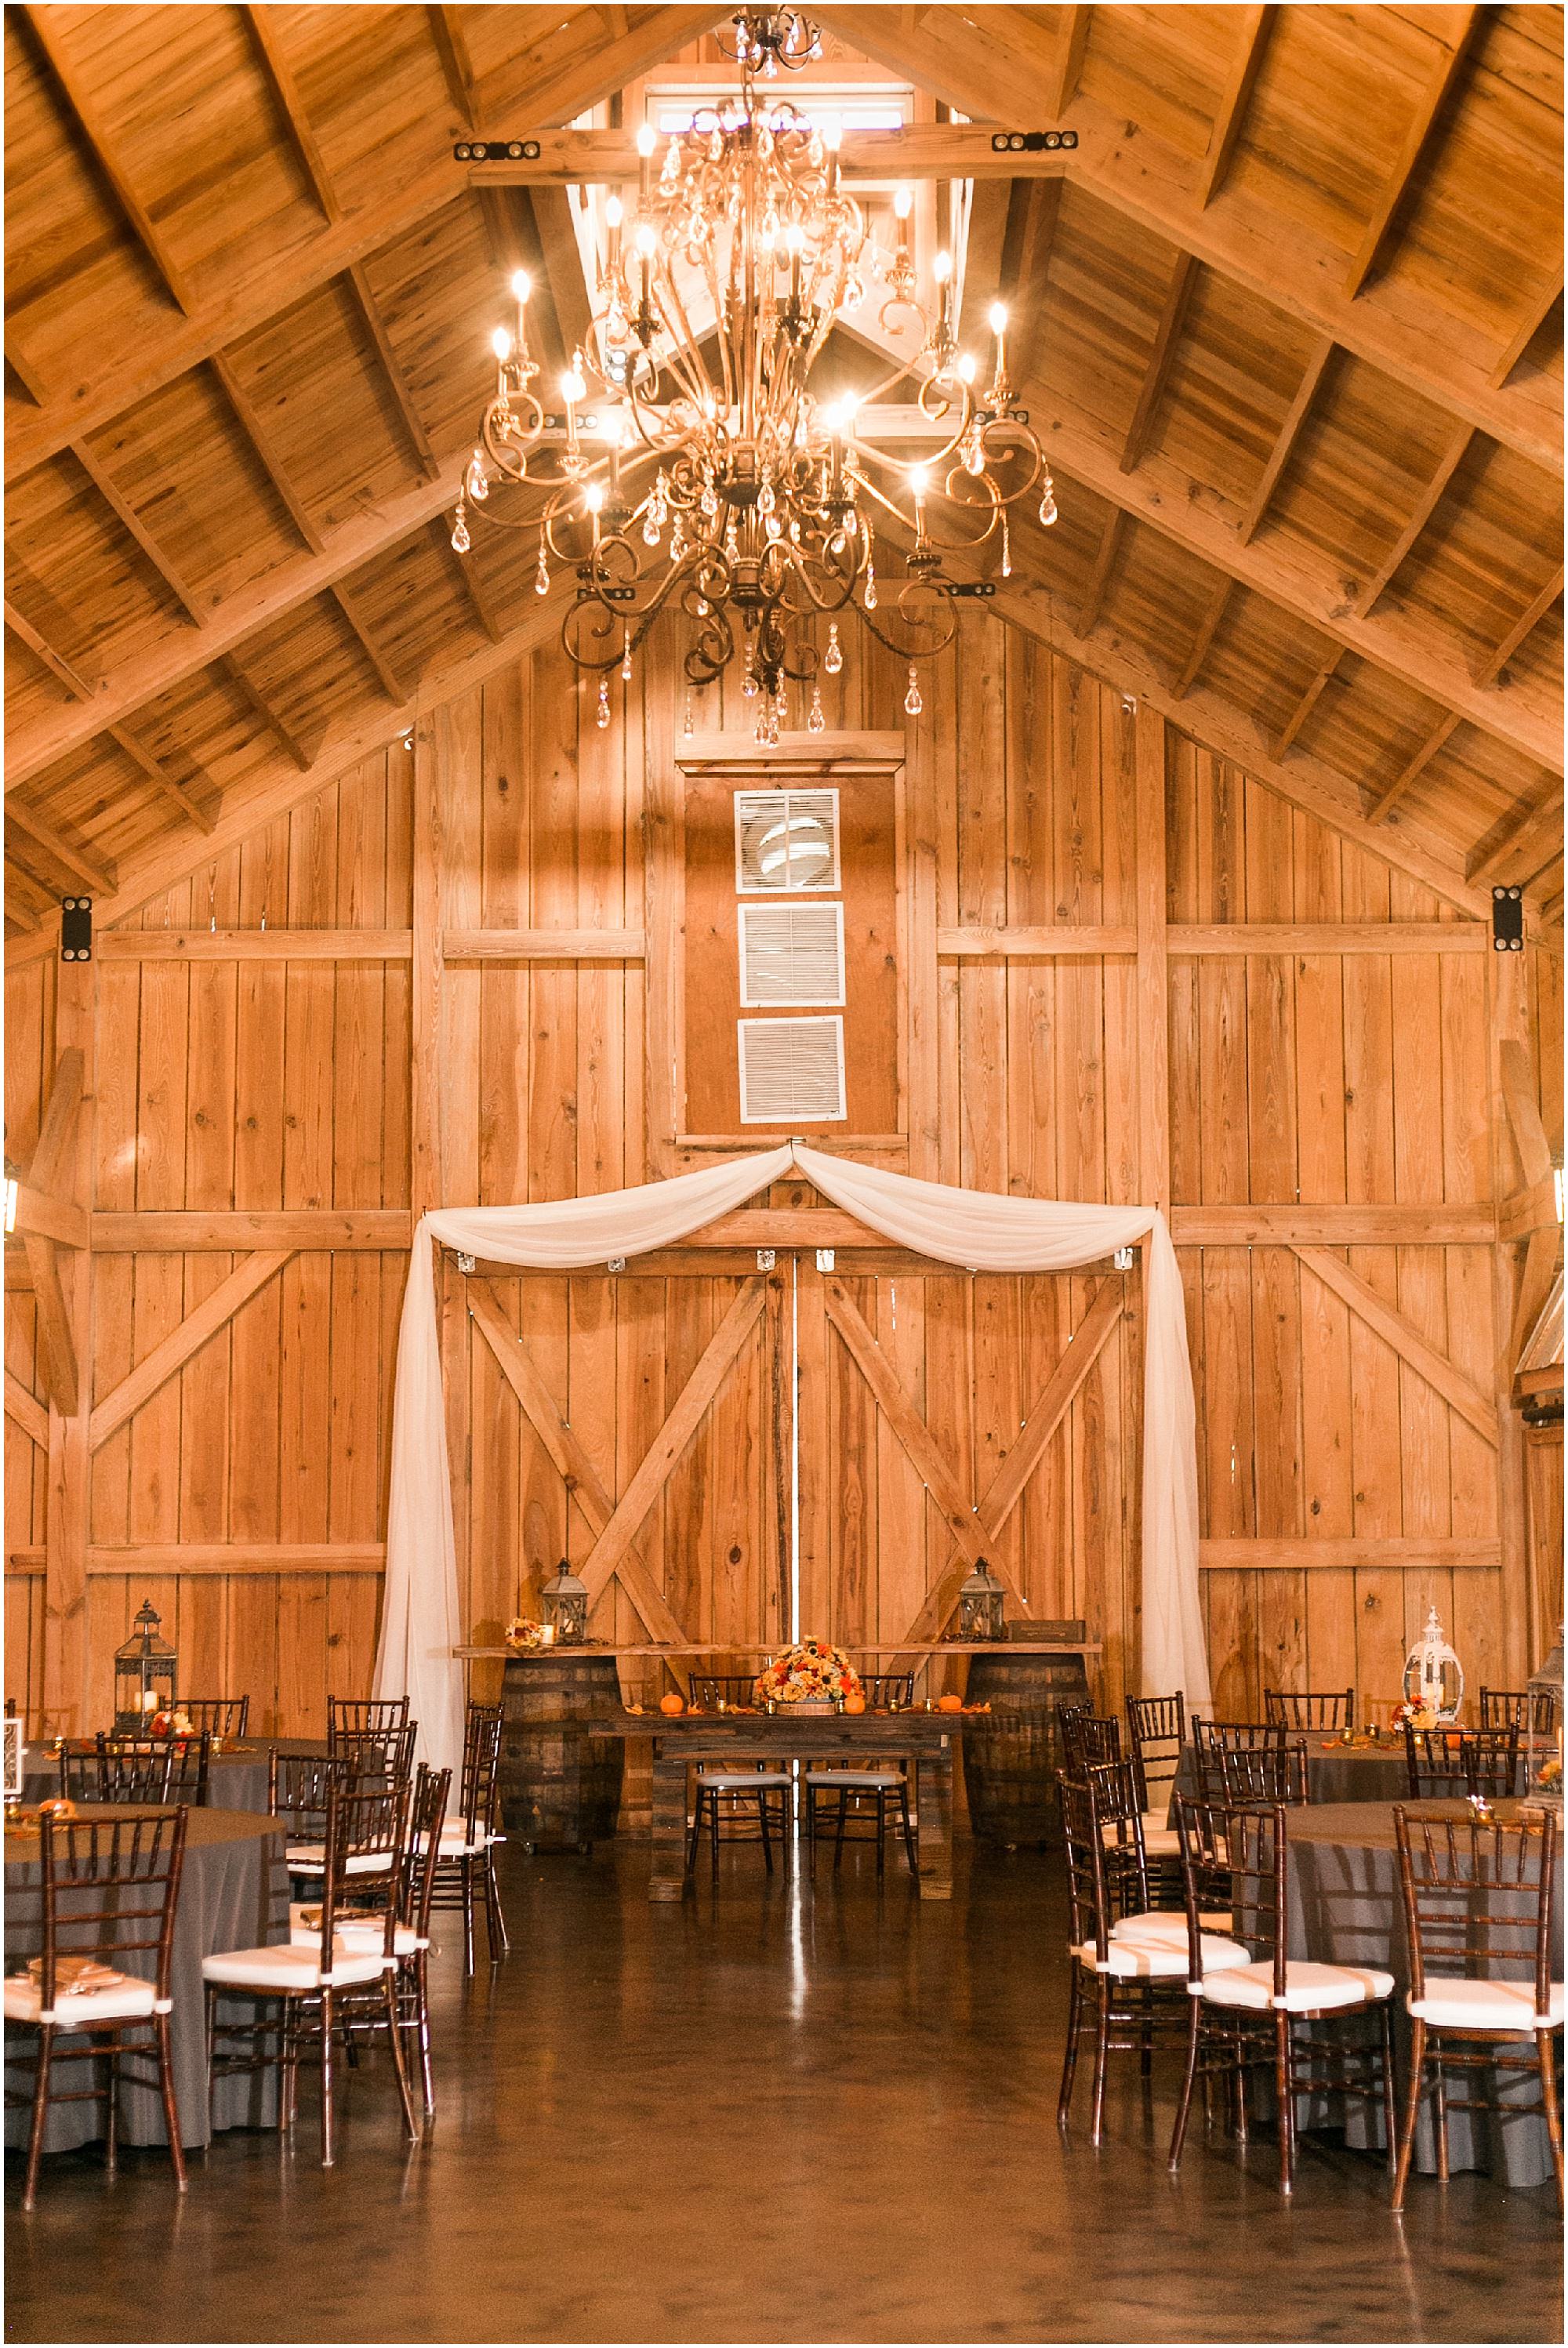 Inside of the barn transformed for a wedding reception